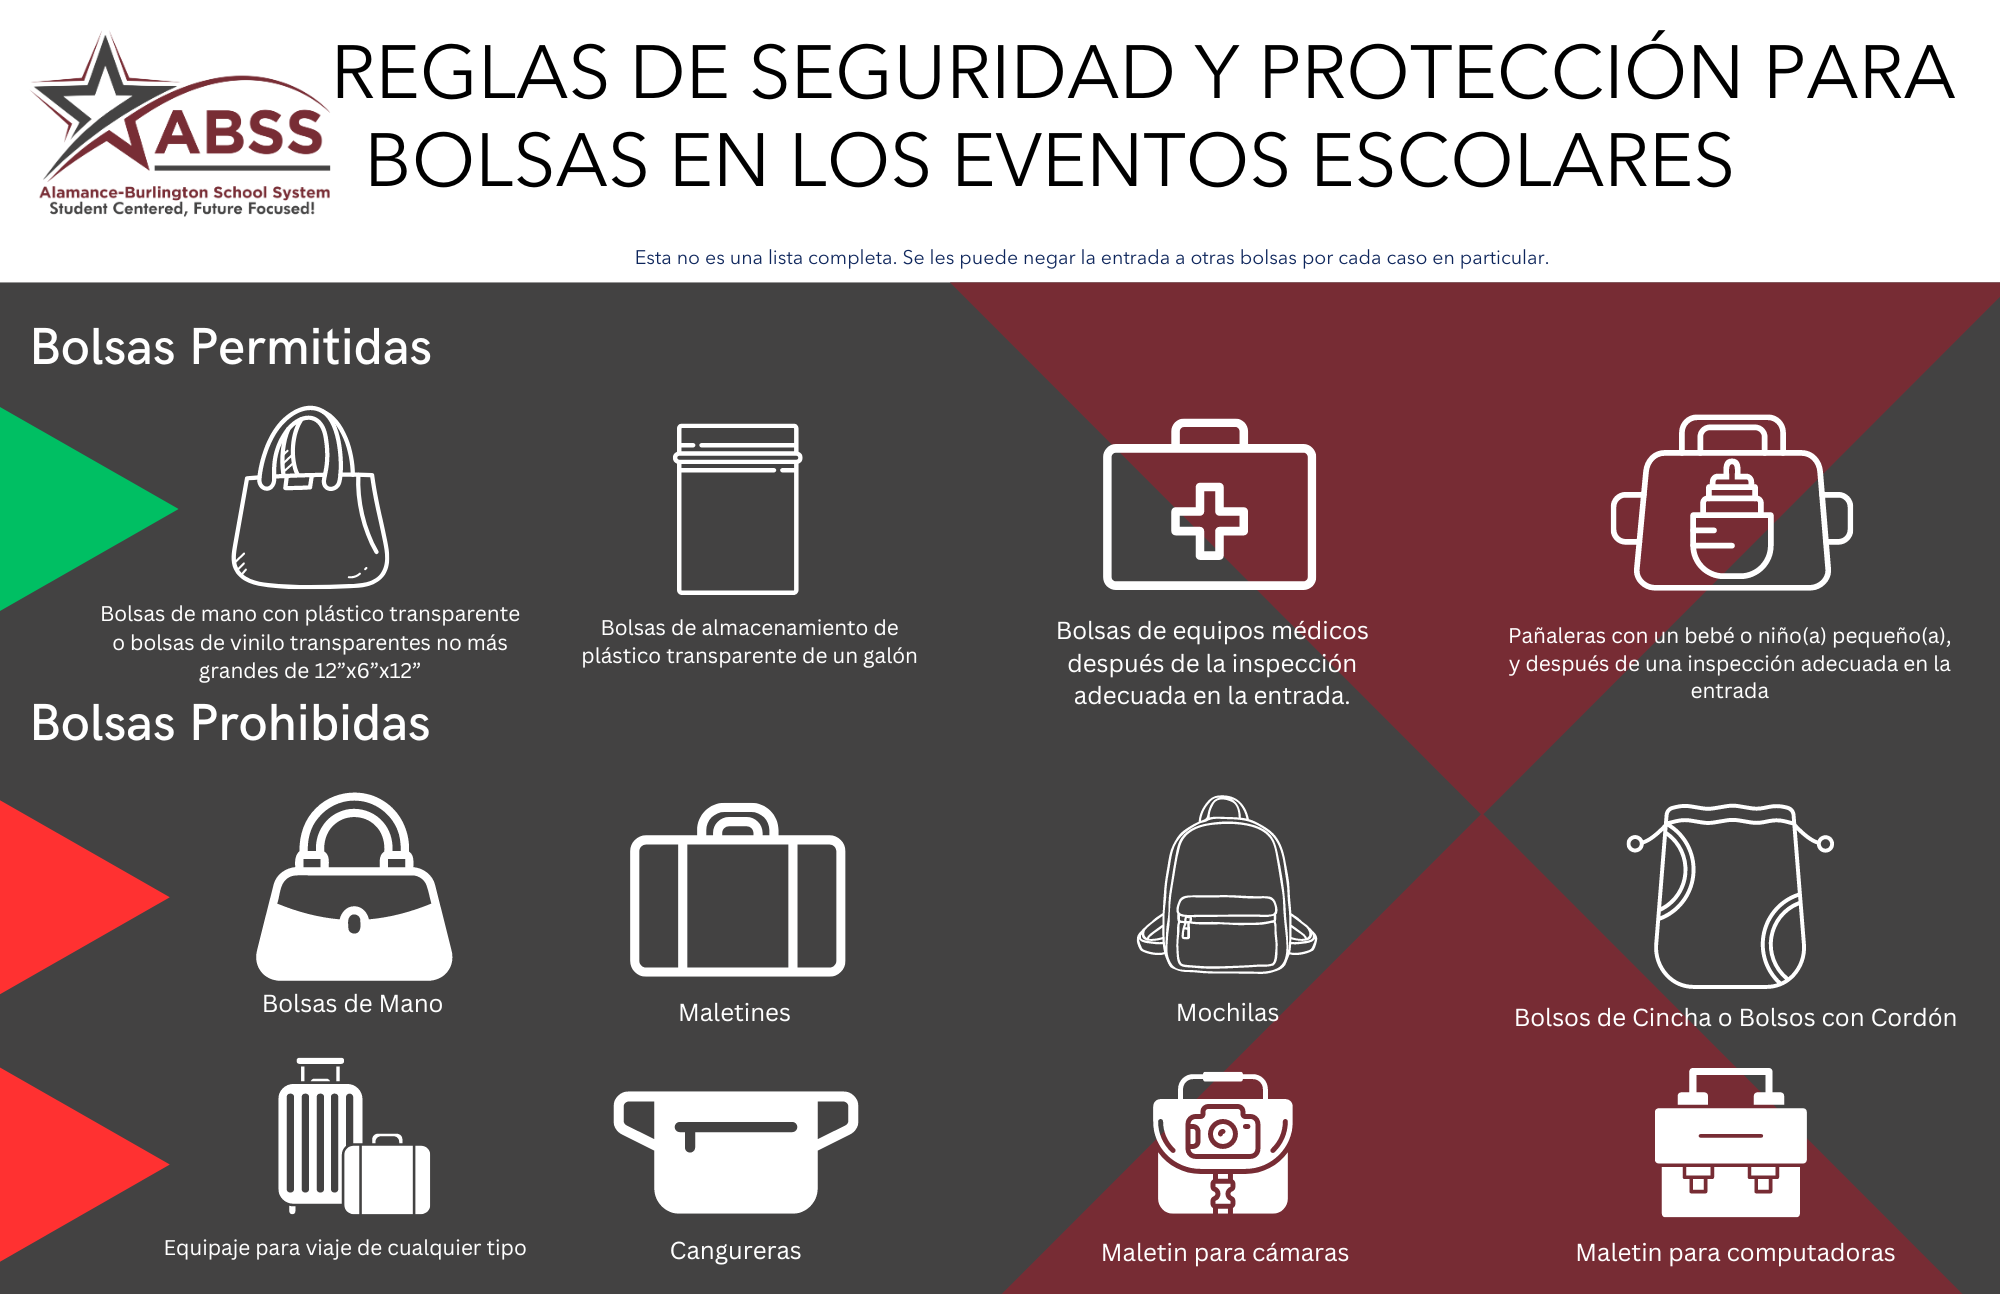 Spanish clear bag policy infographic explaining what one can and cannot bring to an event